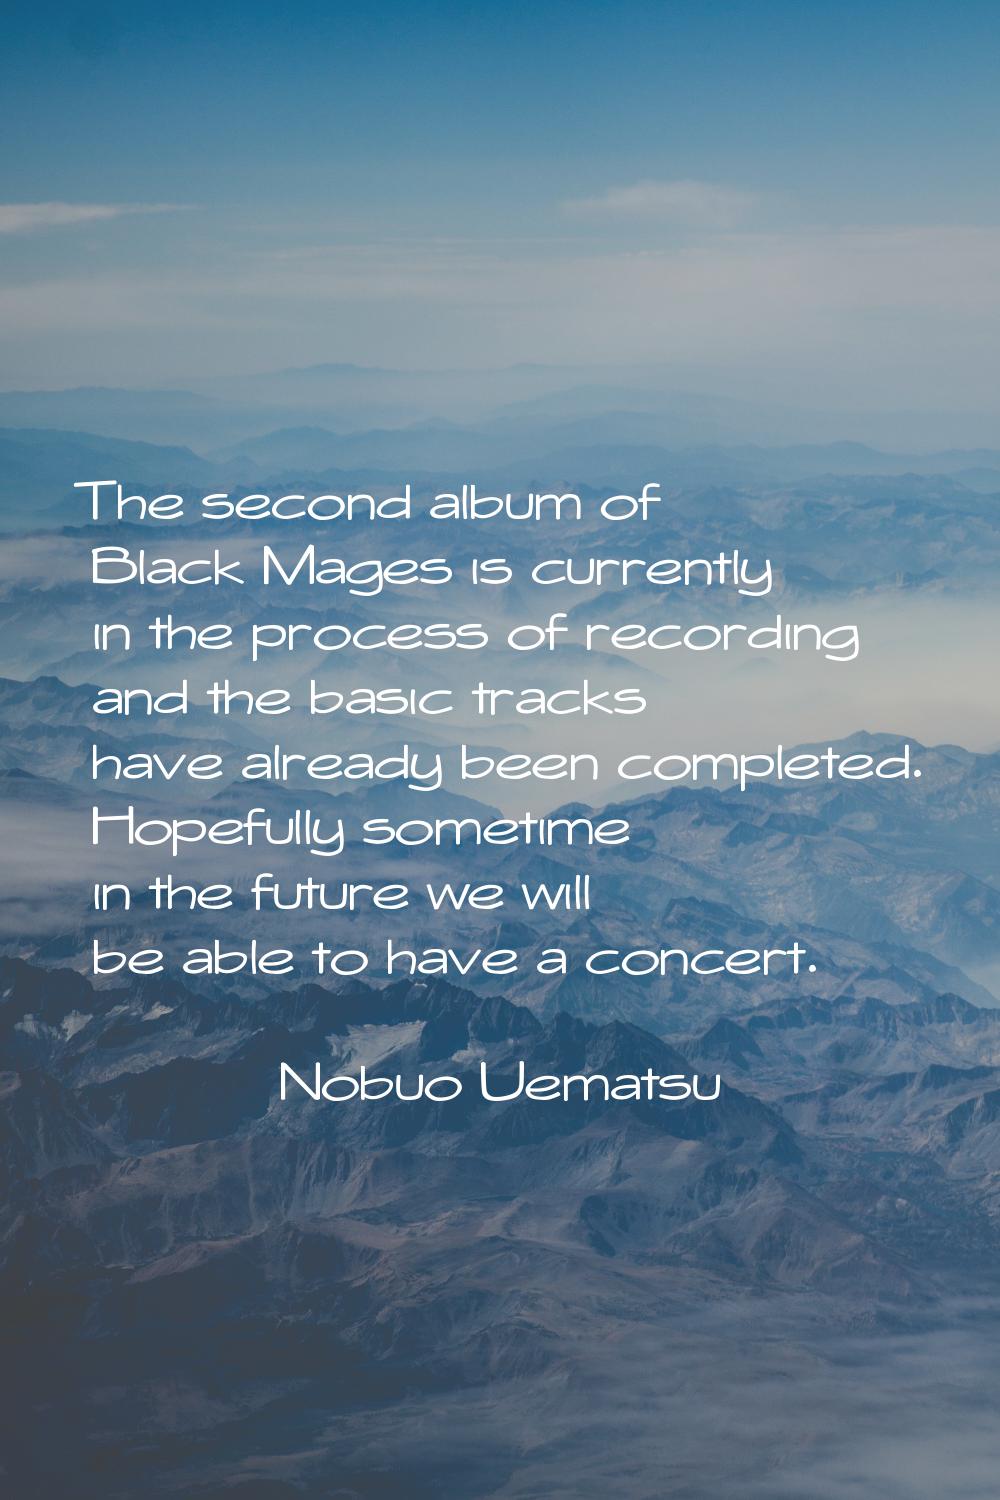 The second album of Black Mages is currently in the process of recording and the basic tracks have 